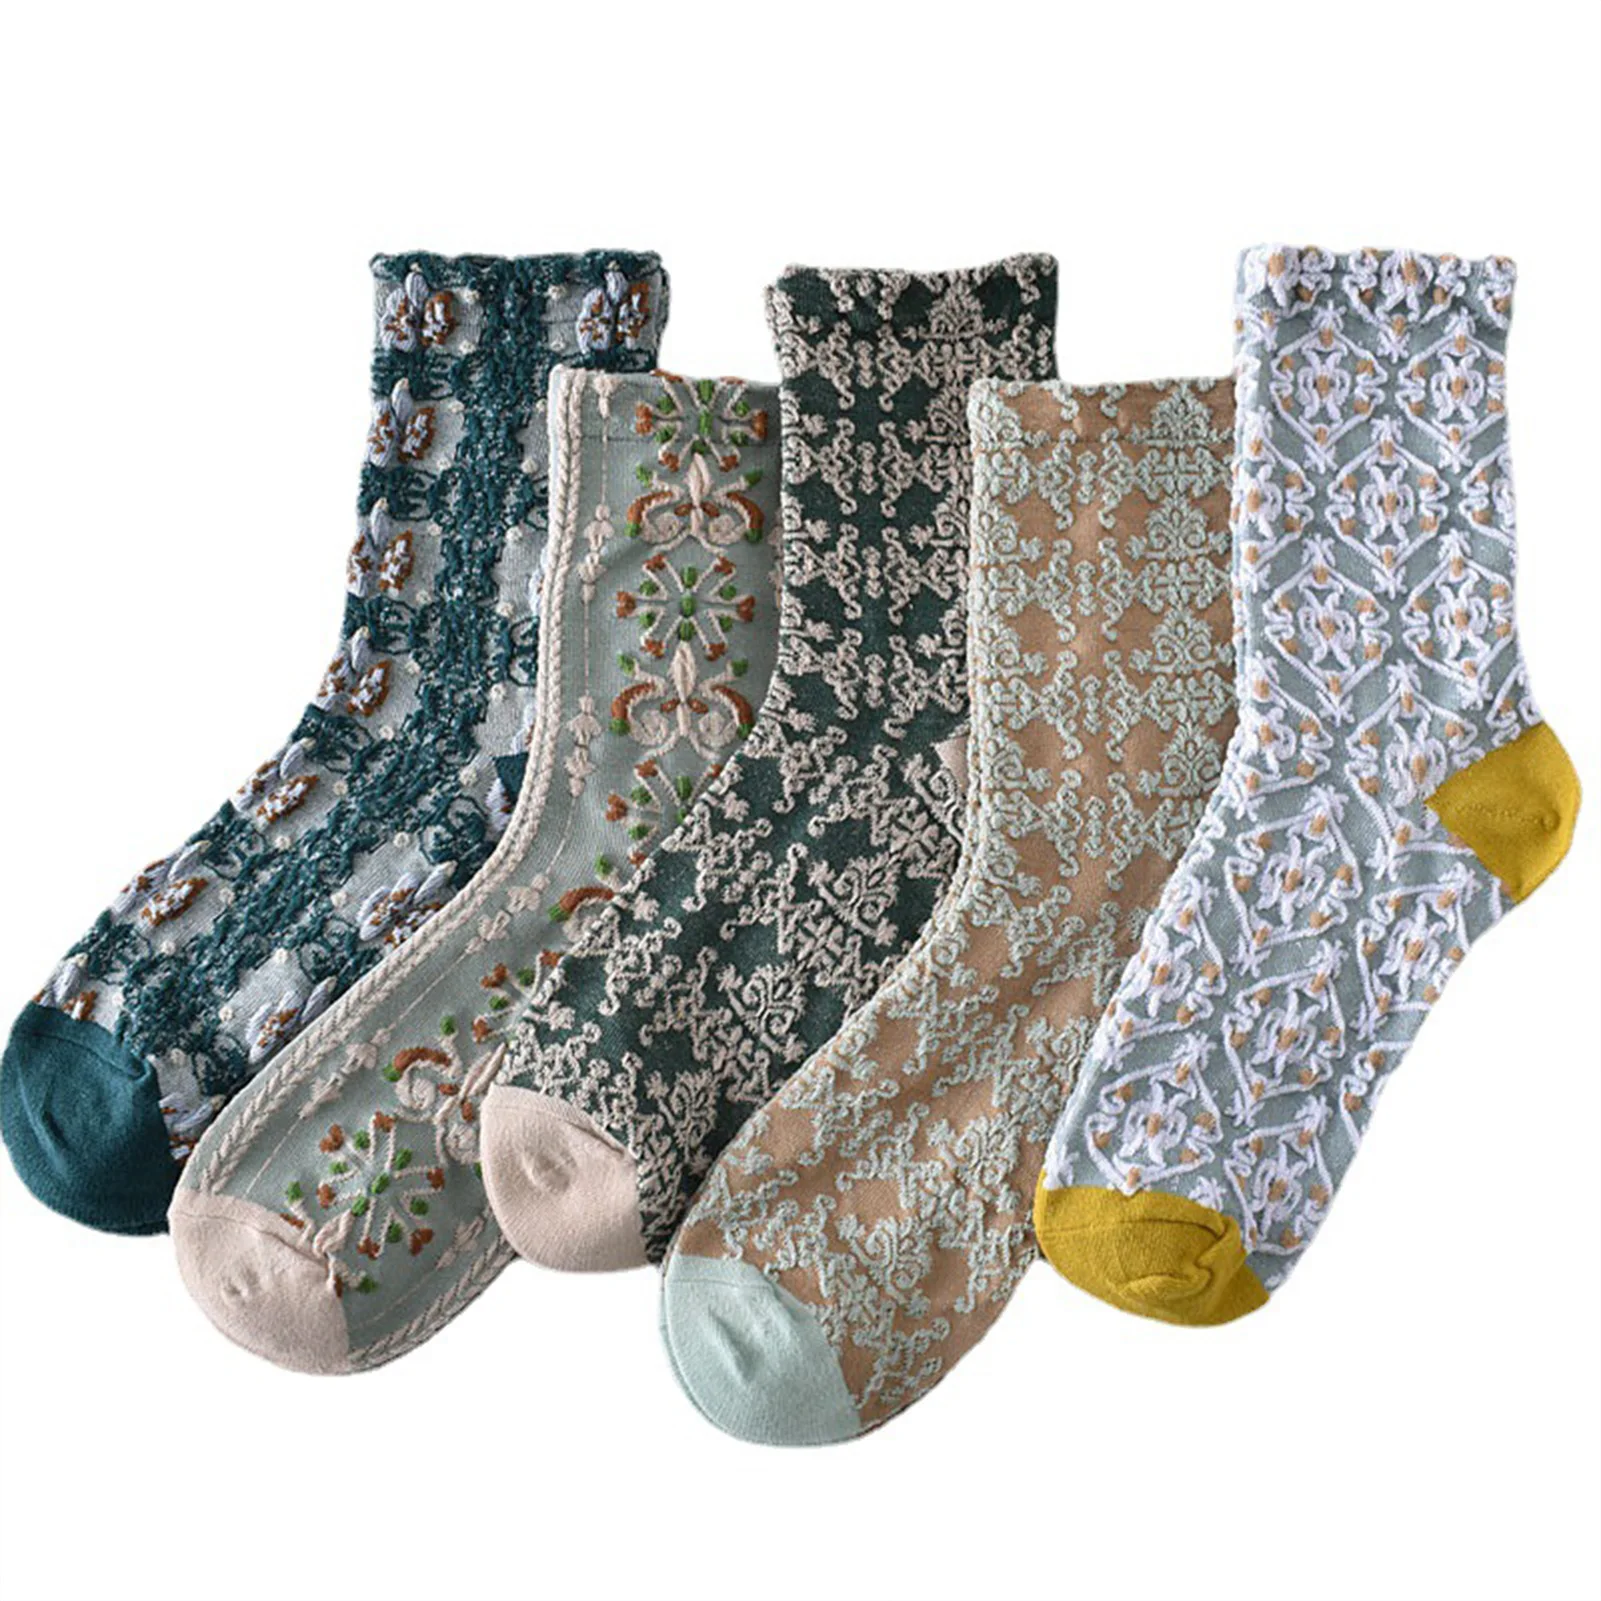 

Womens 10 Pairs Comfort Socks All- Relief Antibacterial Socks for Daily Home Art Photos Wearing